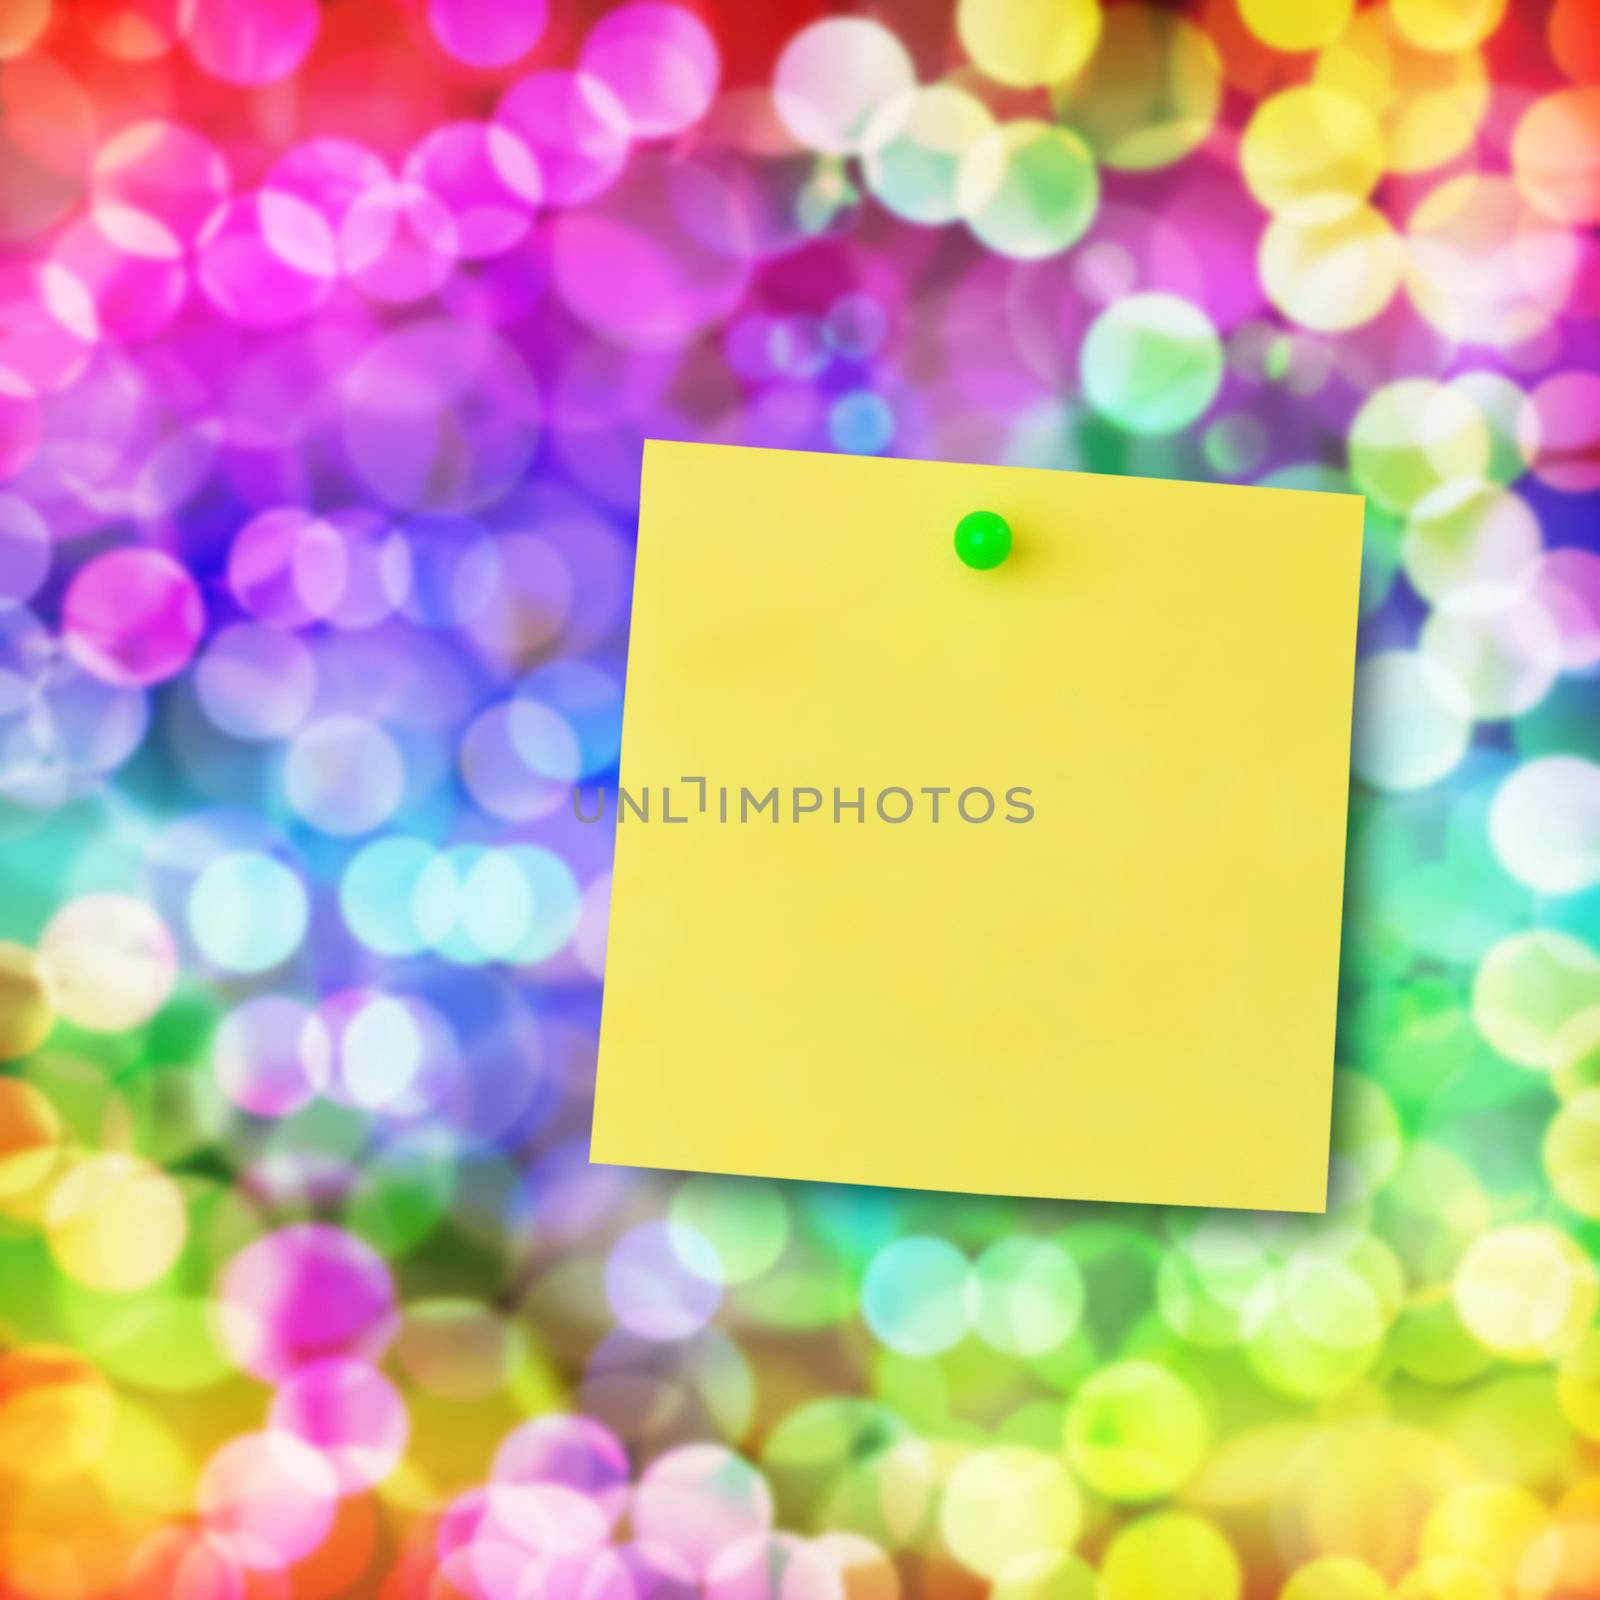 Sticky note on glowing colorful magical neon light background.